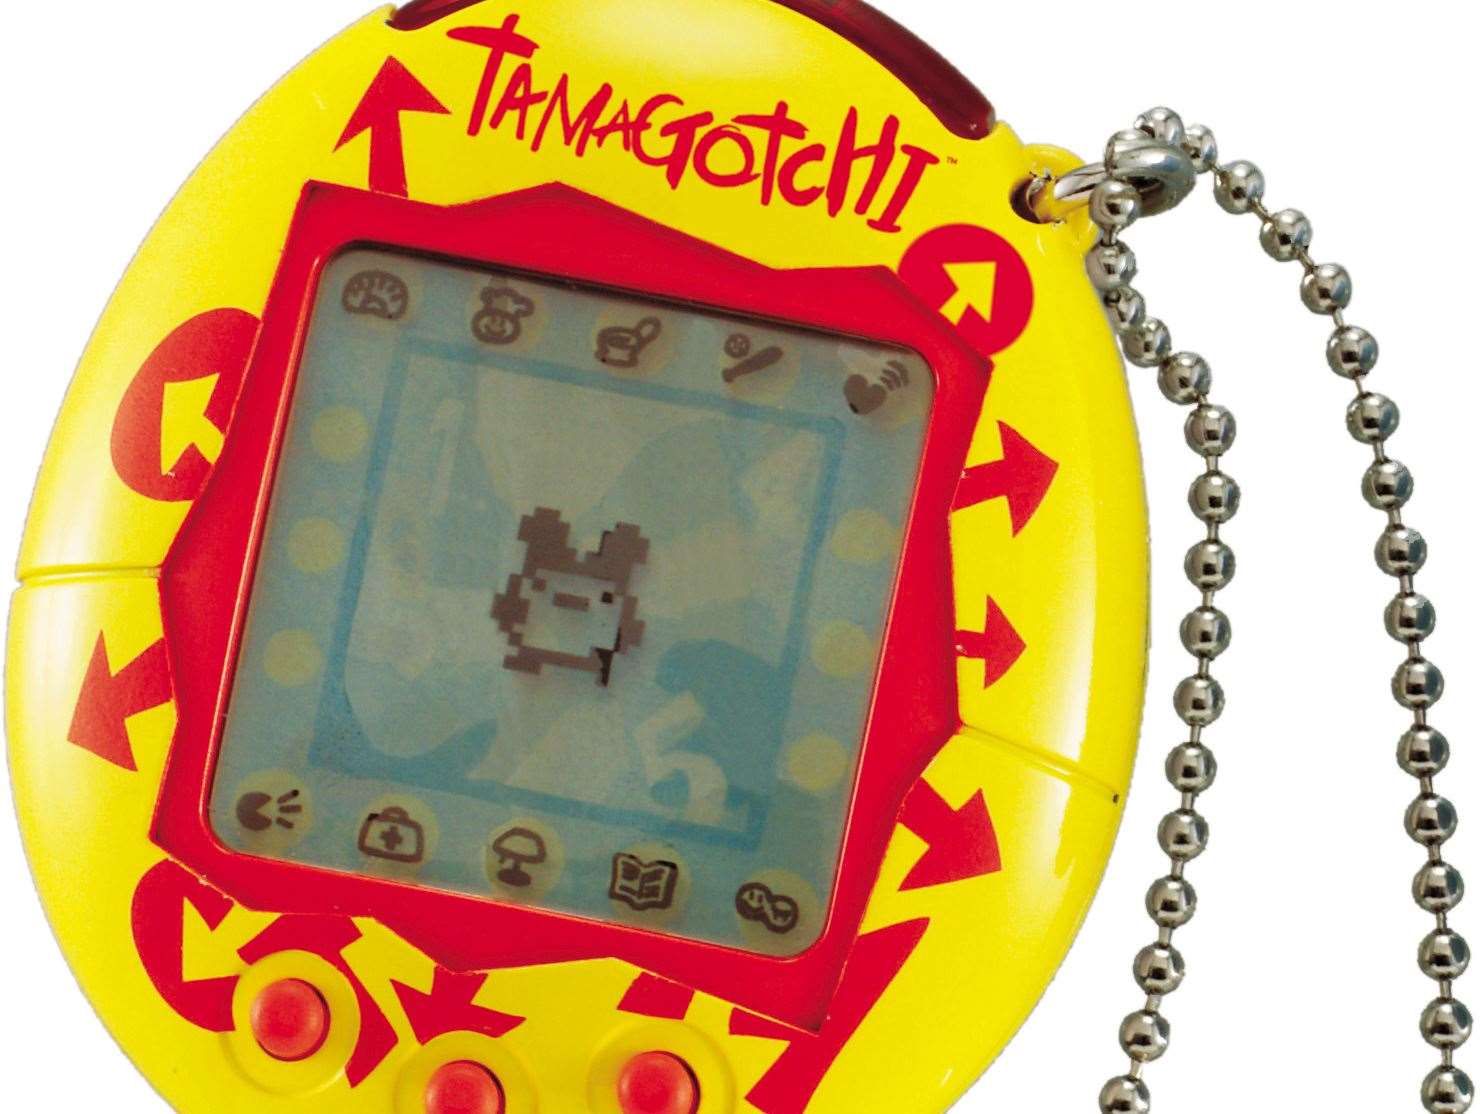 Did you manage to keep your Tamagotchi alive and kicking?